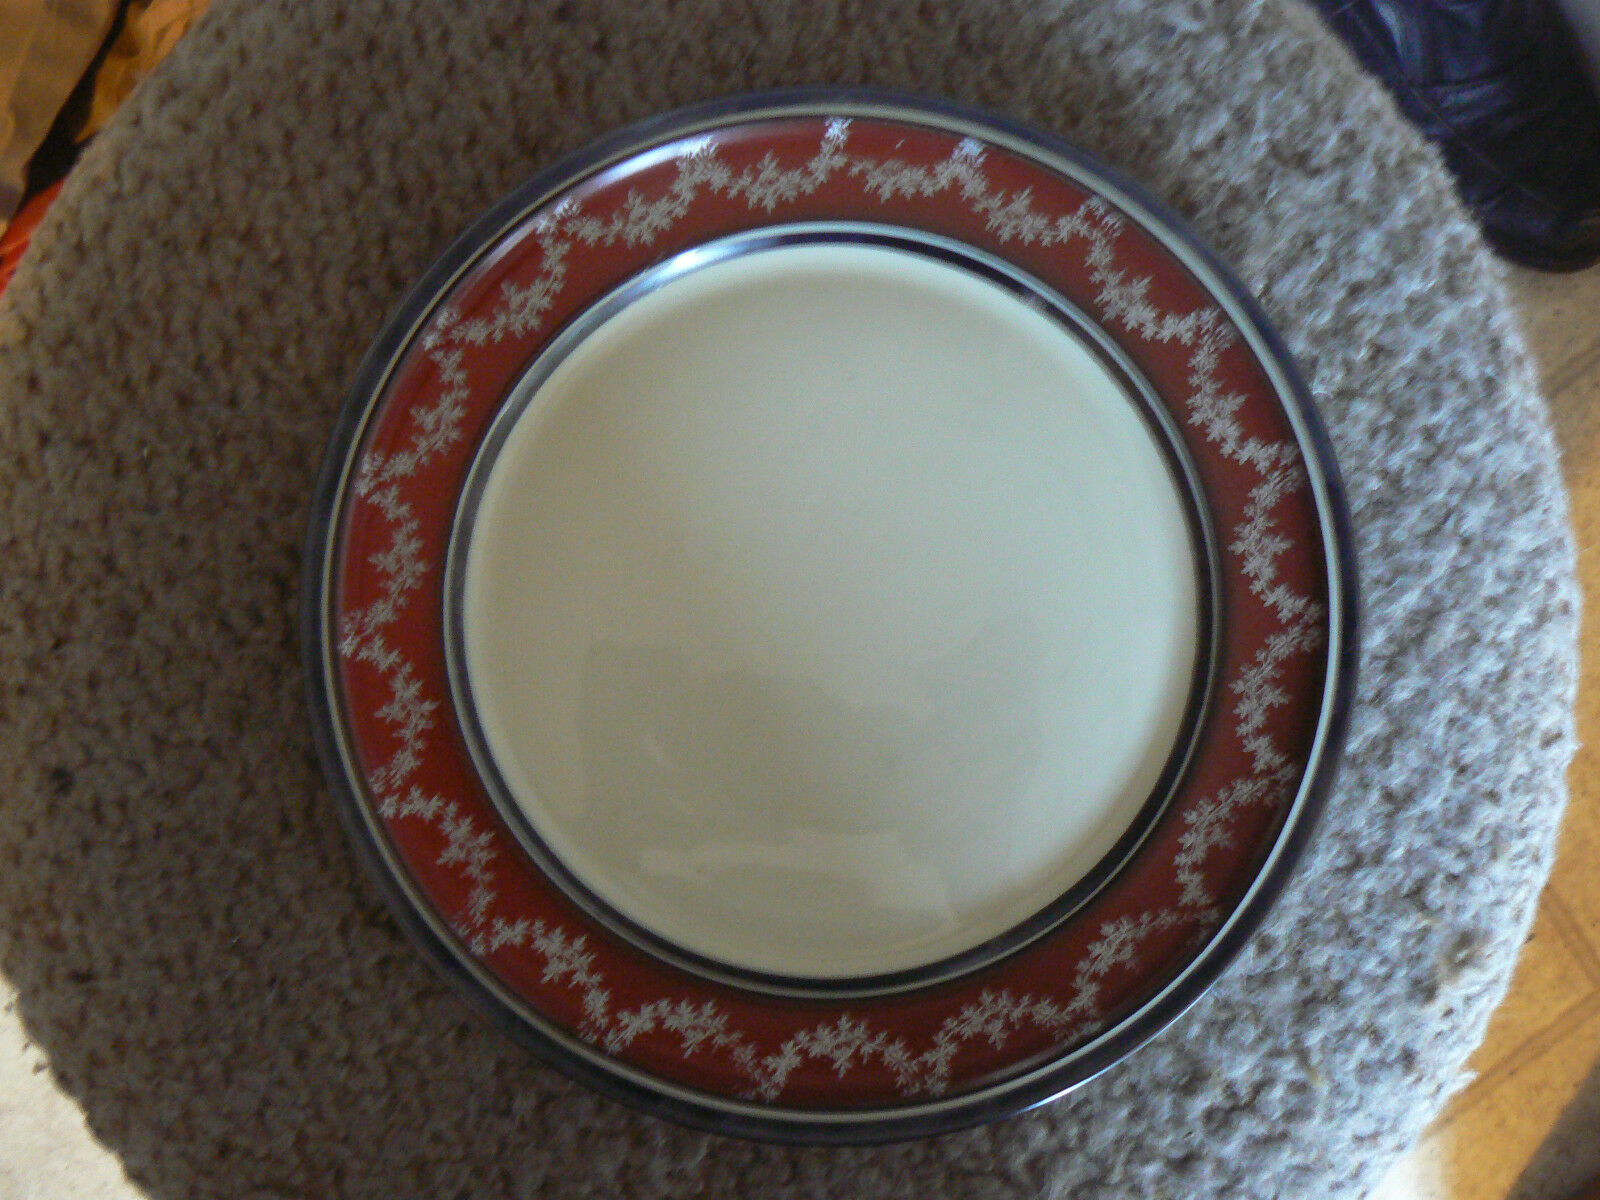 Primary image for Rosenthal salad plate in Winifred shape  () 3 available